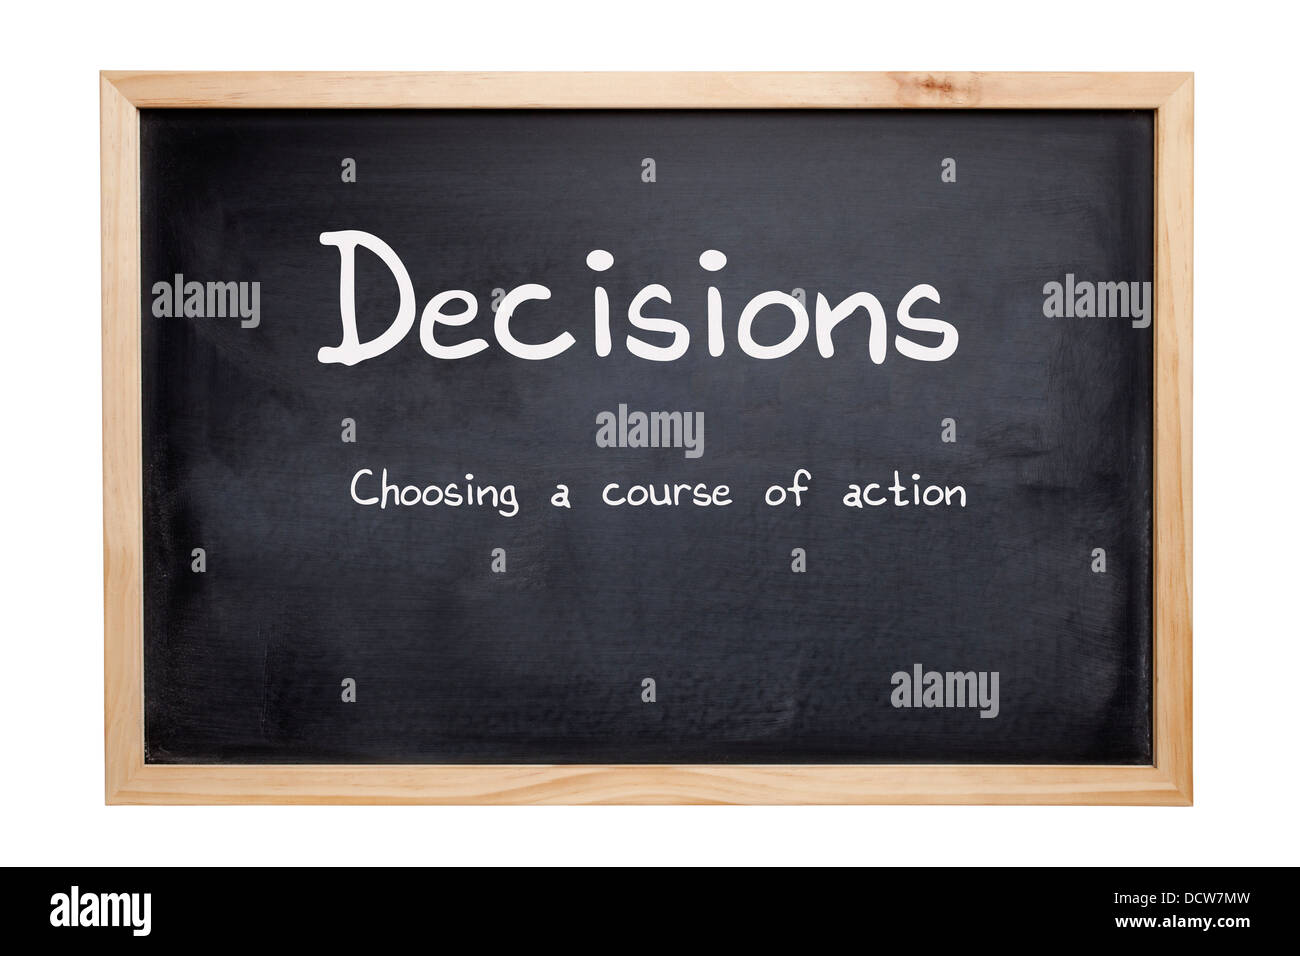 Decisions Concept - a blackboard with the words descisions, choosing a course of action. Clipping path for board. Stock Photo